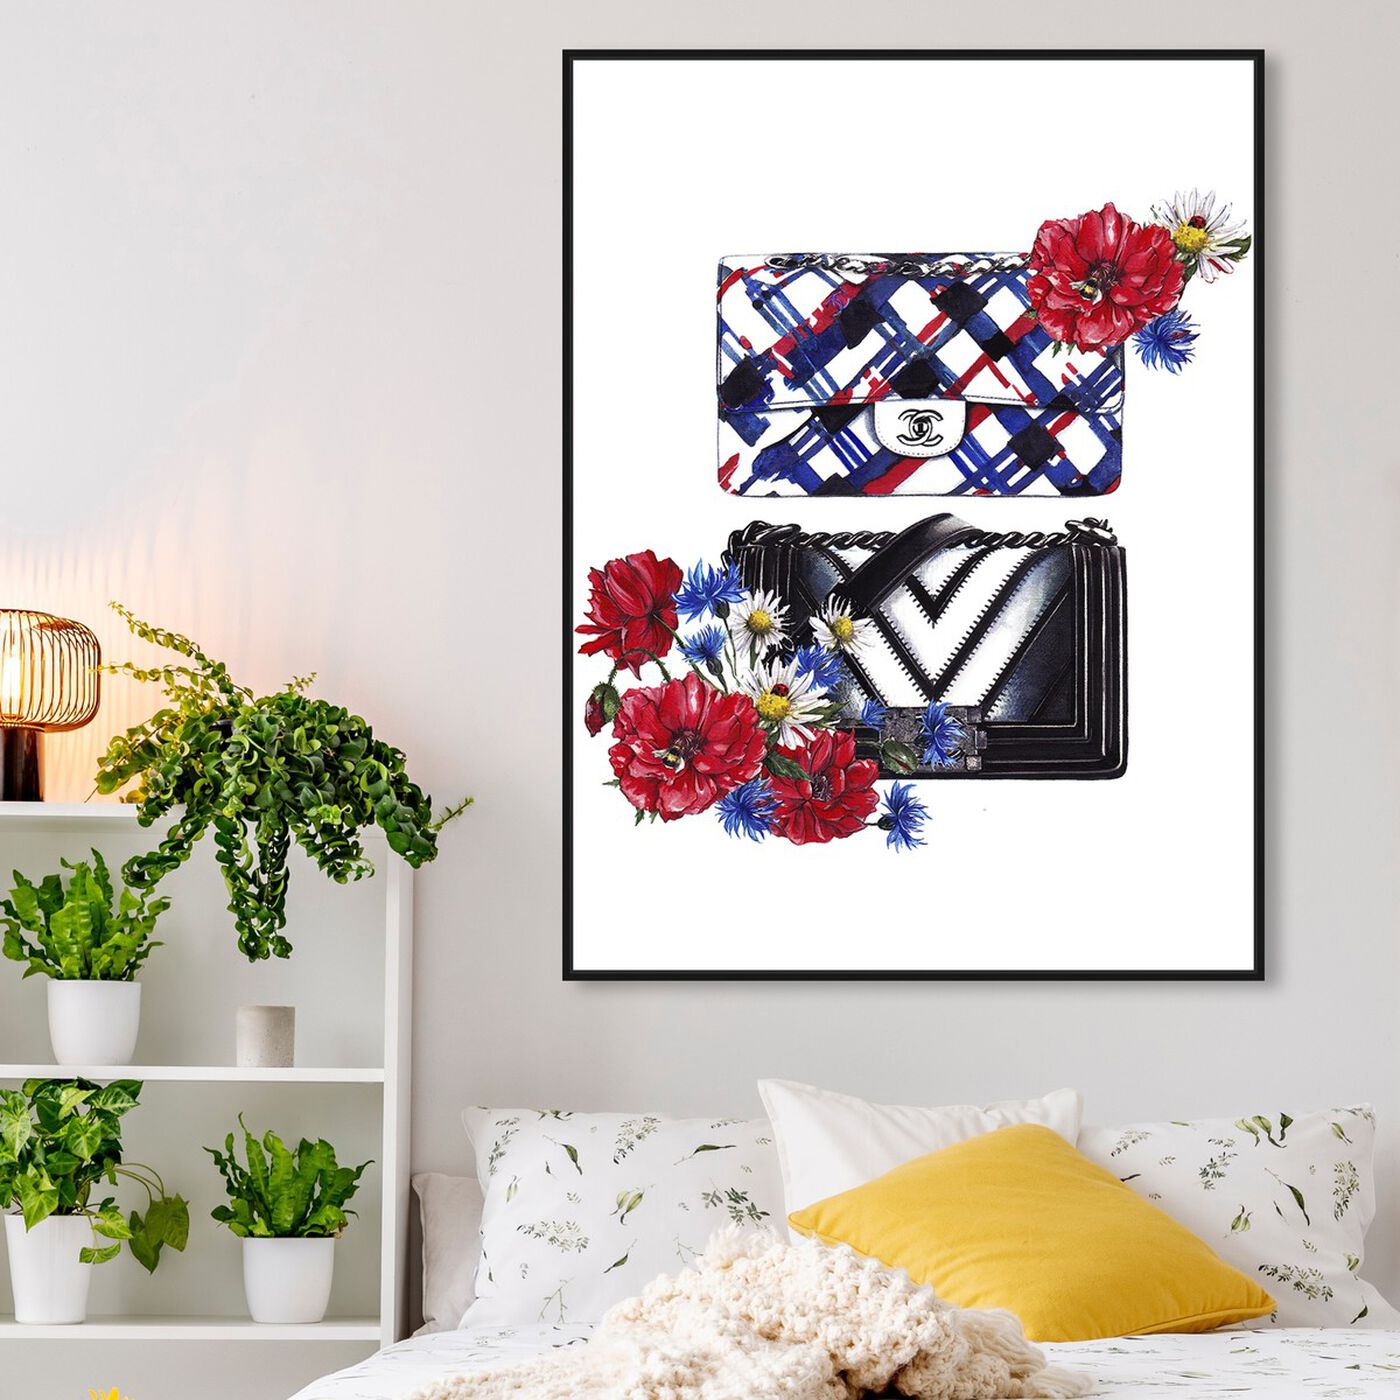 Hanging view of Doll Memories - Bags Floral featuring fashion and glam and handbags art.